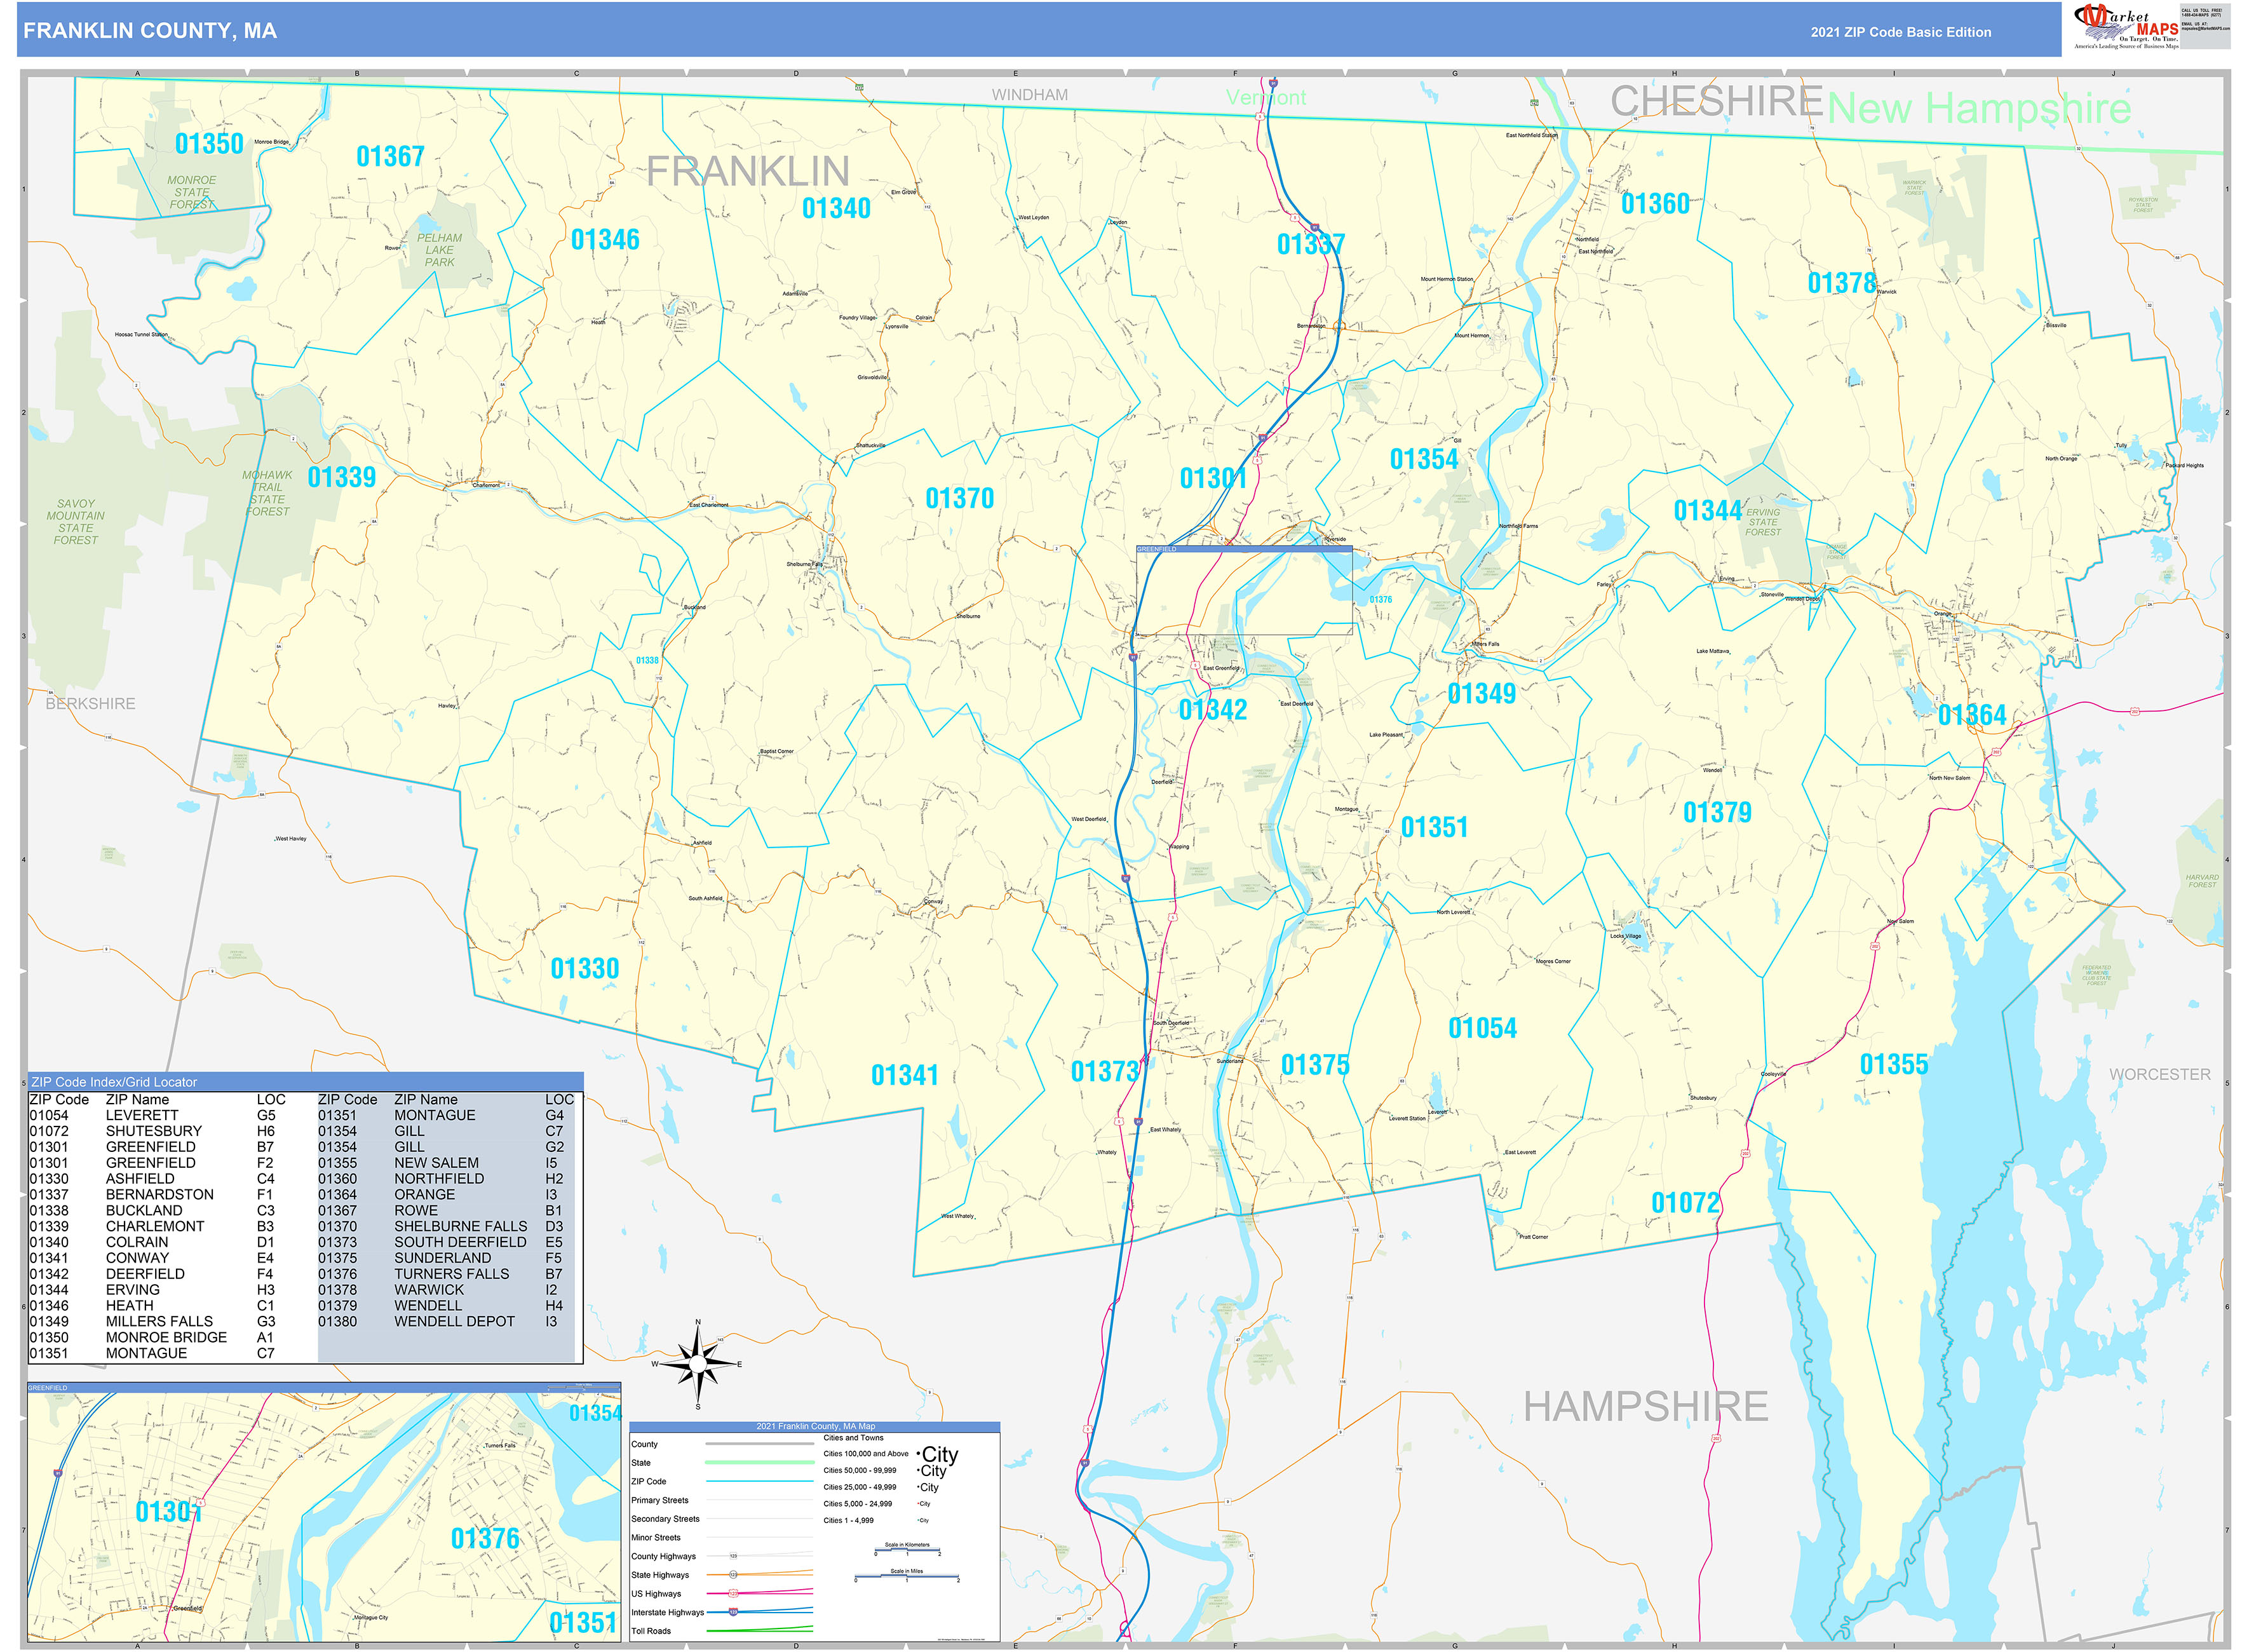 Franklin County, MA Zip Code Wall Map Basic Style by MarketMAPS - MapSales